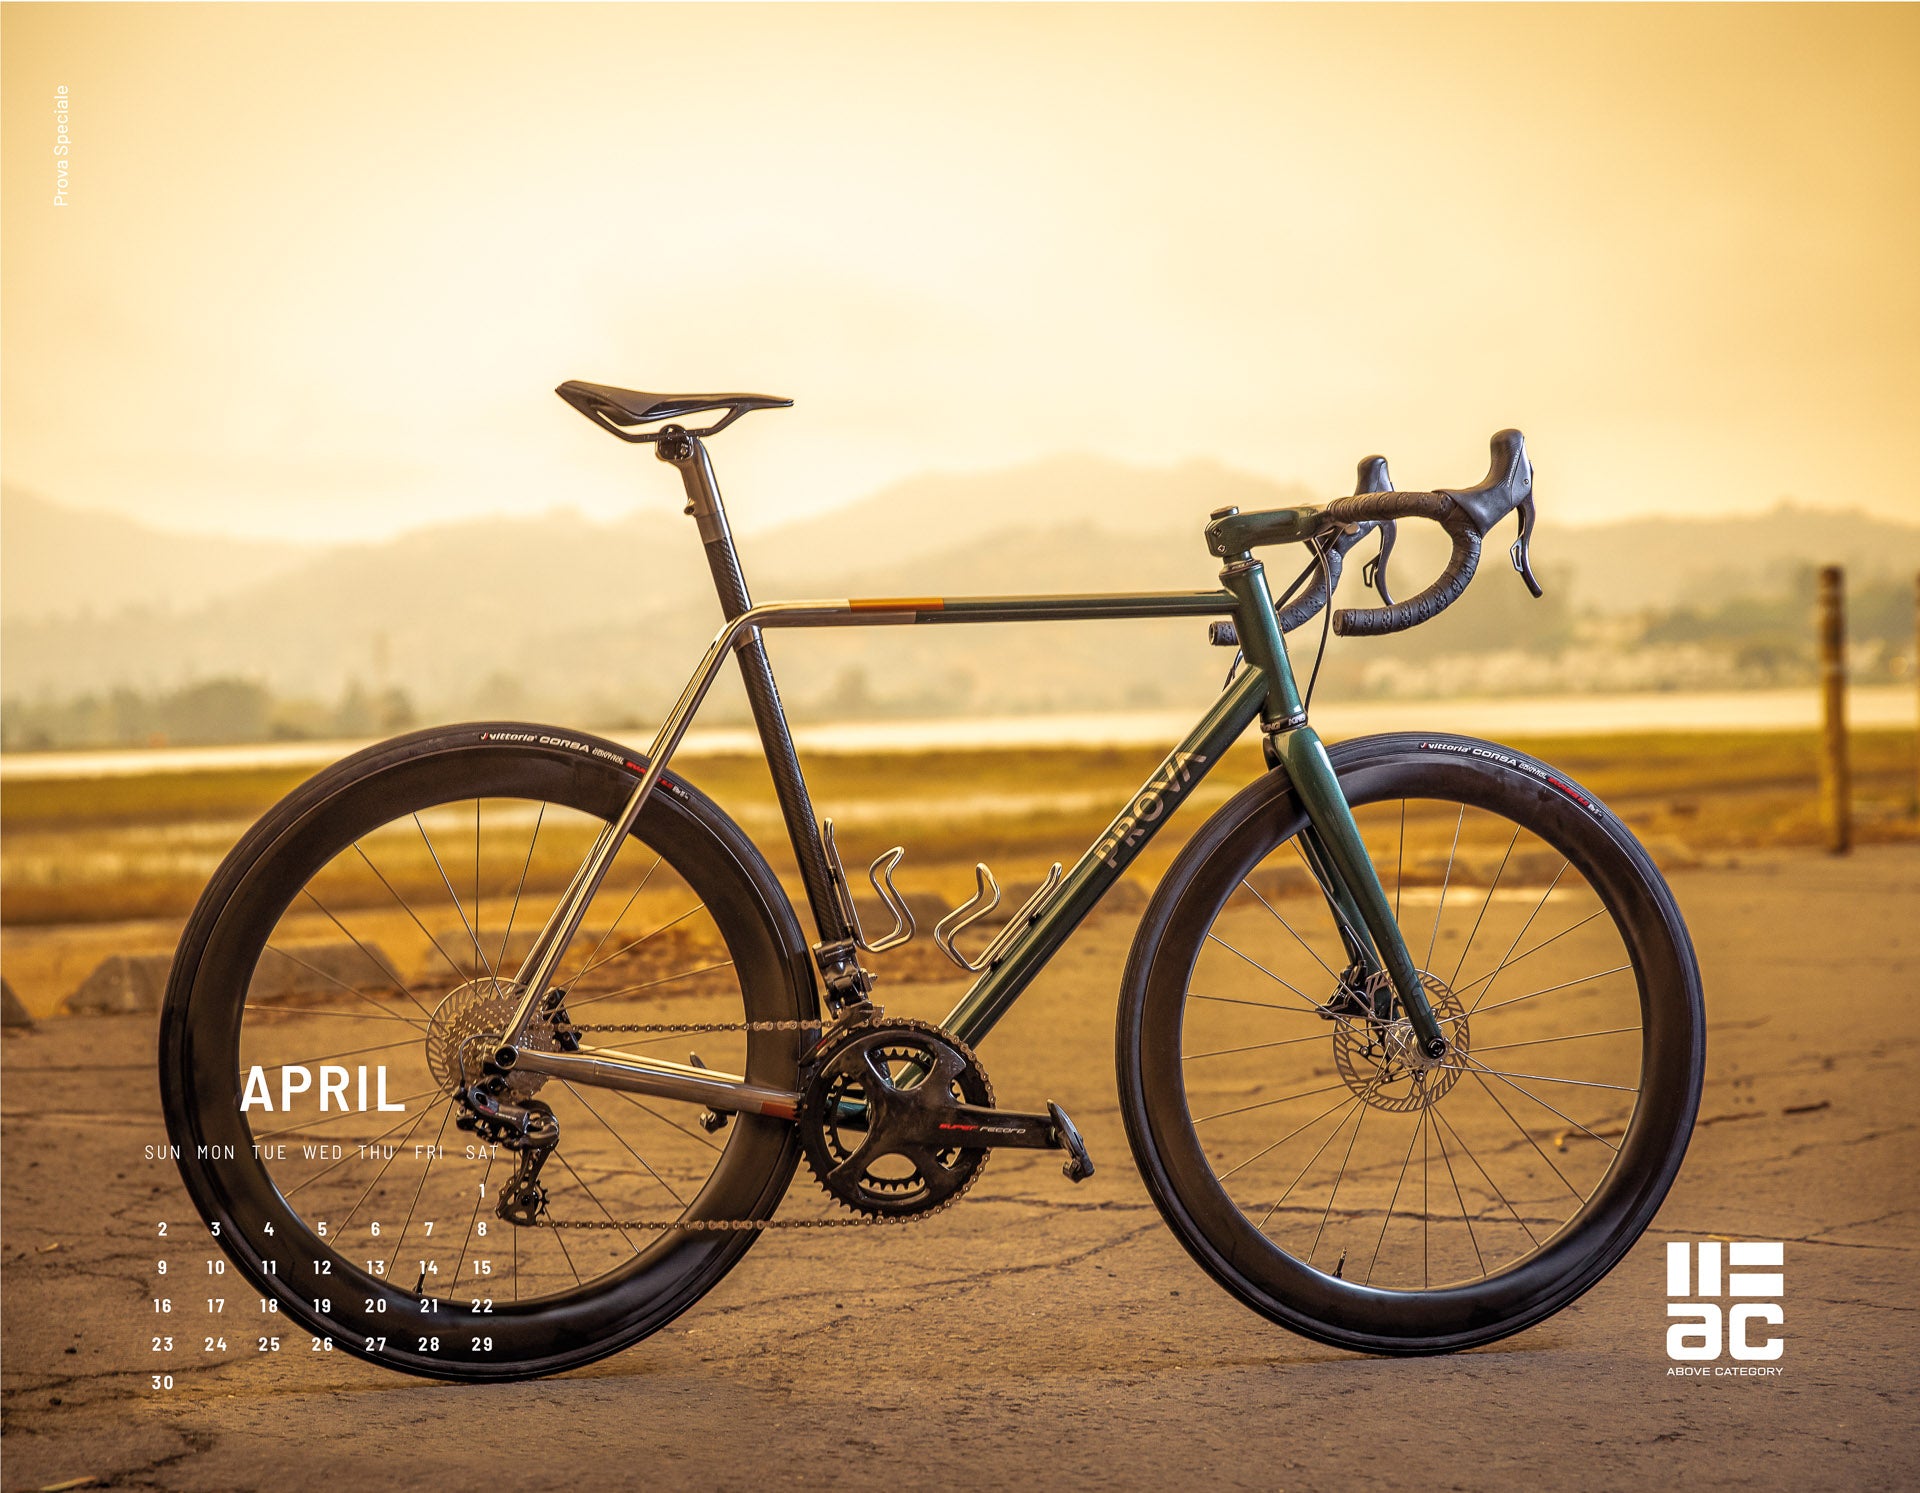 Month by Month The 2023 Above Category Dream Bike Calendar